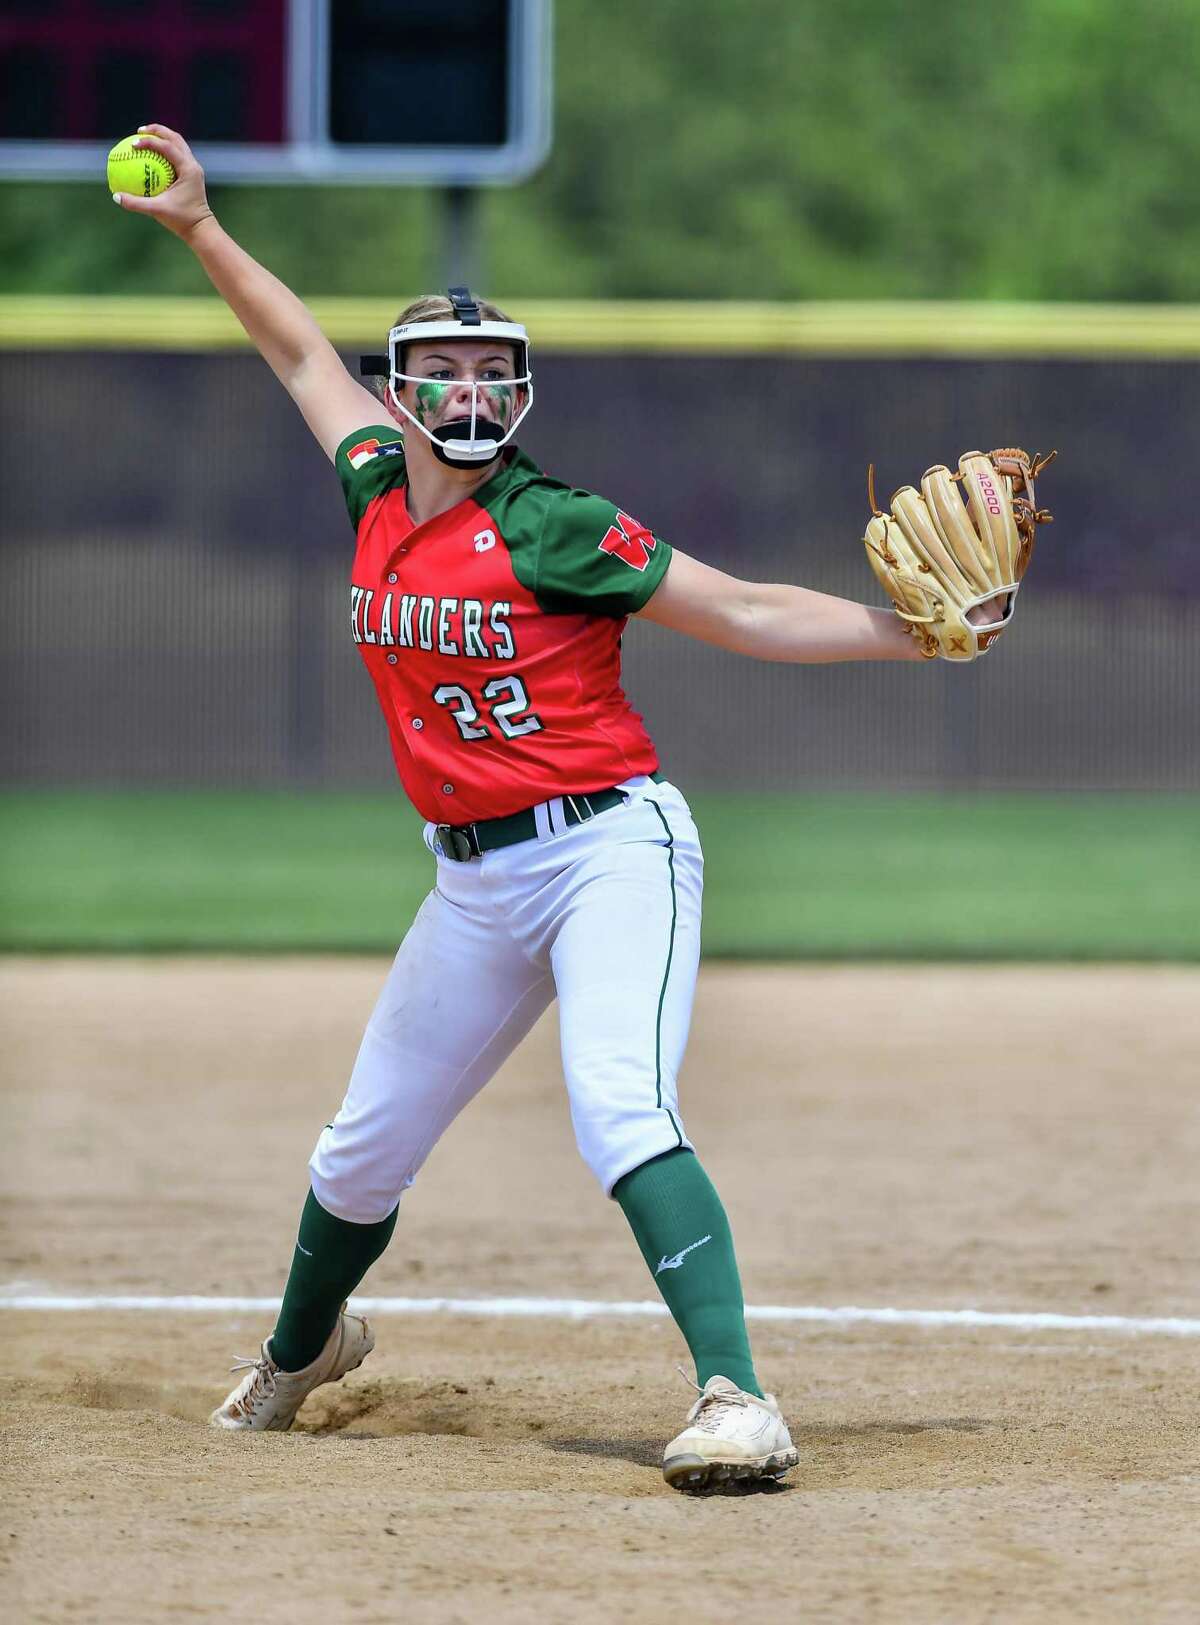 The Woodlands’ Chesney Davis (22) pitches in the sixth inning during a Region II-6A quarterfinals softball game at Magnolia High School on Saturday, May 14, 2022. Woodlands beat Grand Oaks 14-11 in 7 innings.